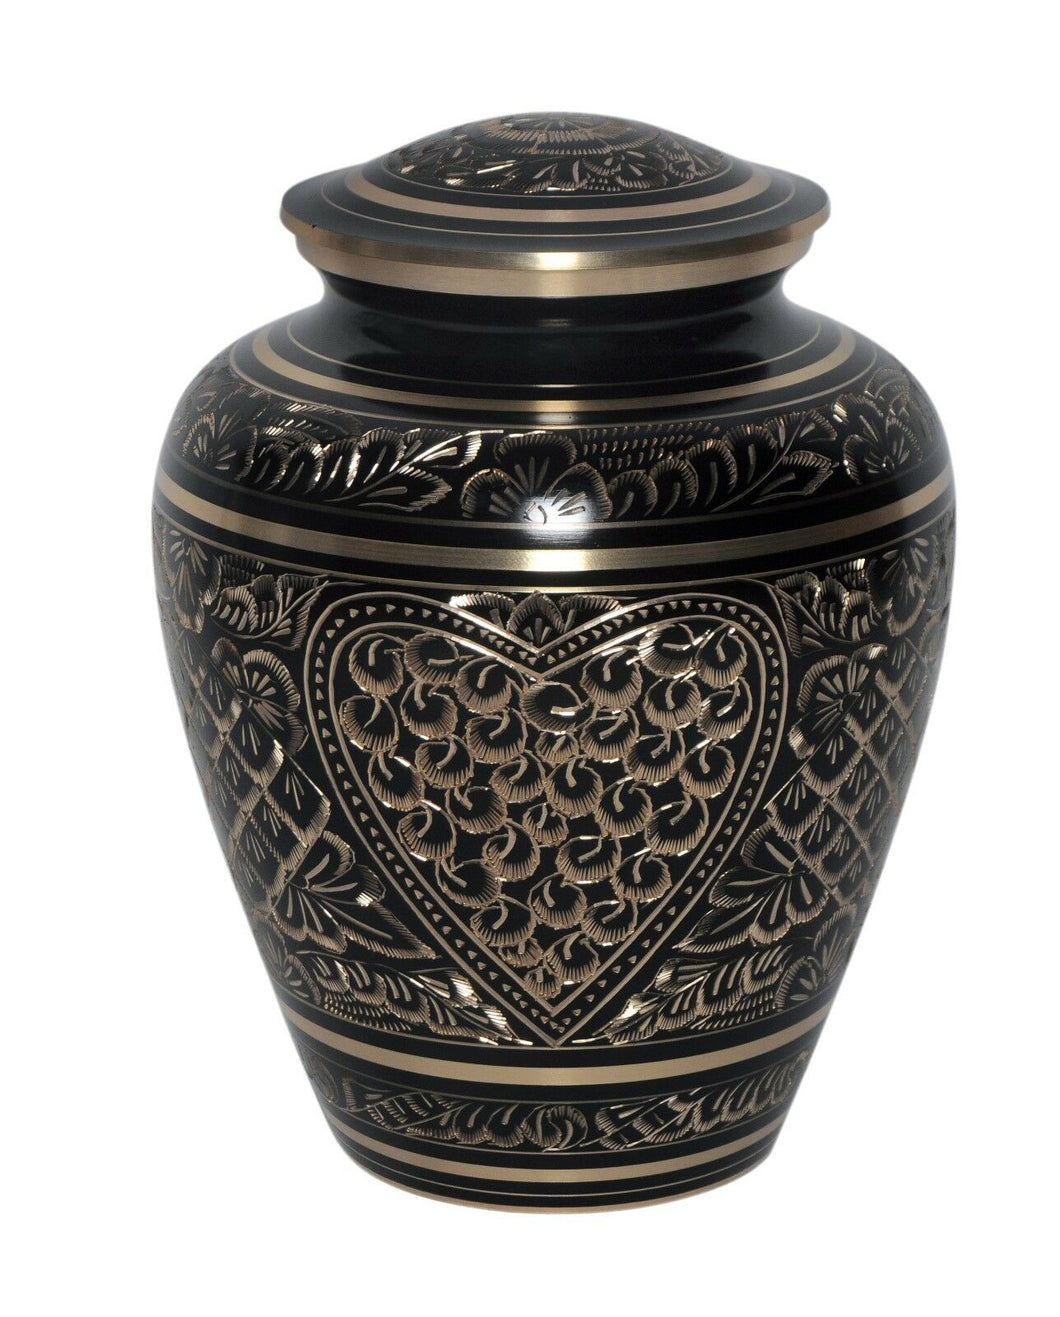 Large/Adult 200 Cubic Inches Etched Ebony Brass Funeral Cremation Urn for Ashes